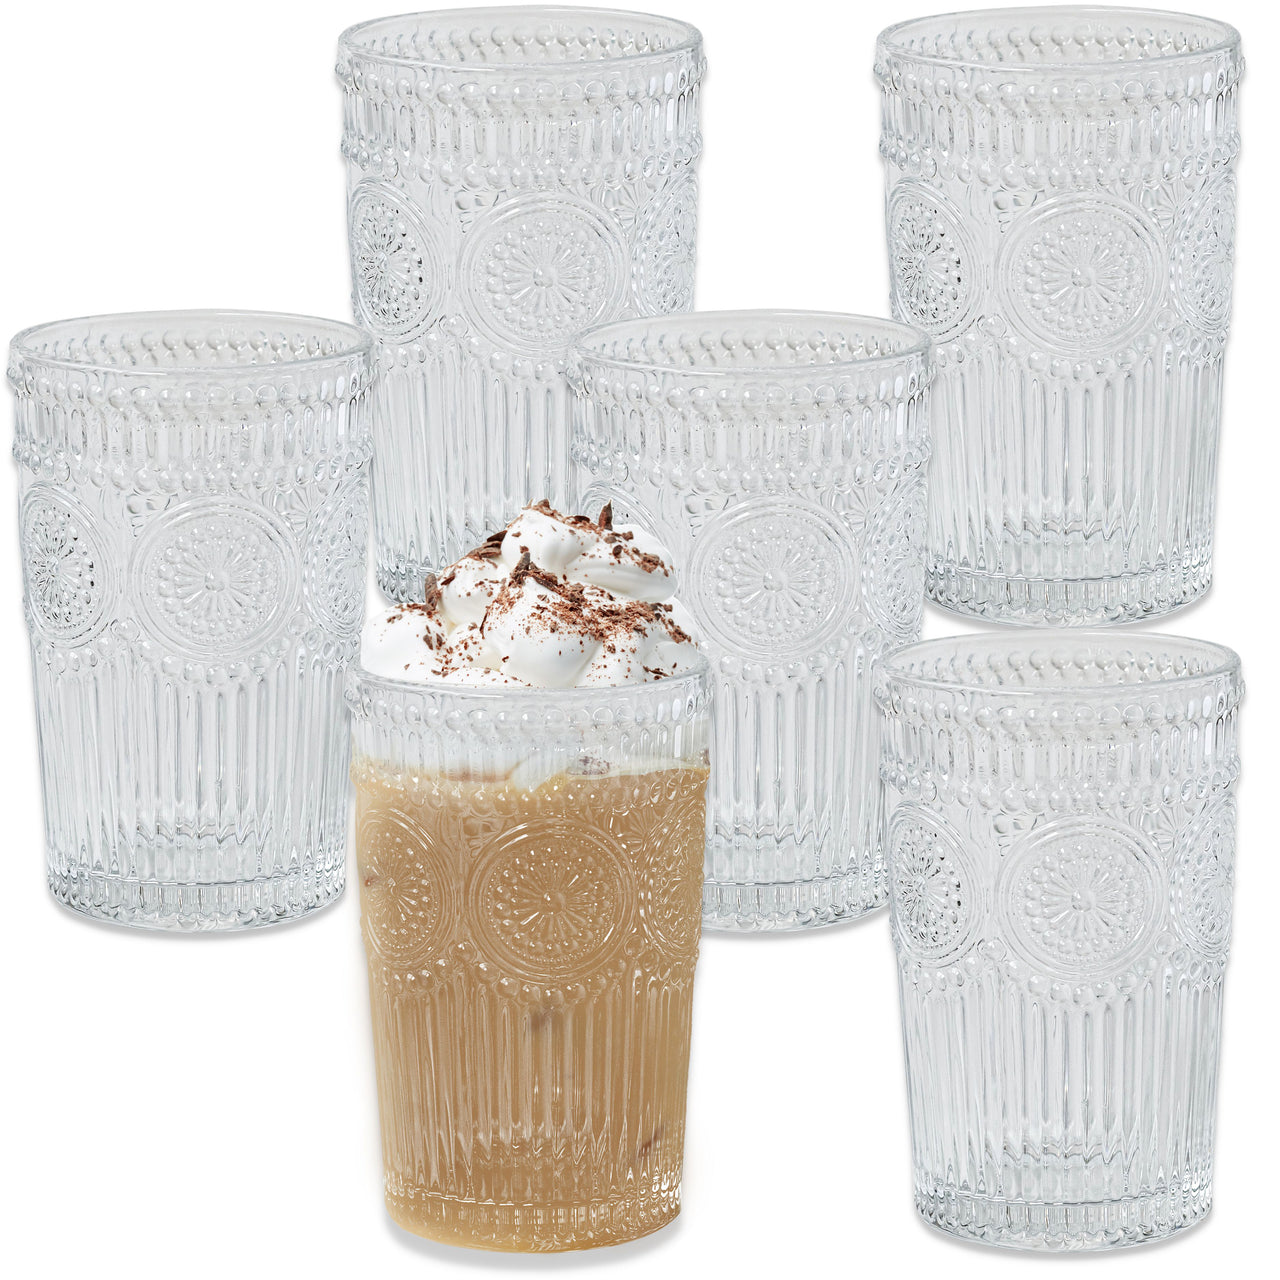 13 oz. Vintage Textured Clear Drinking Glasses (Set of 6)